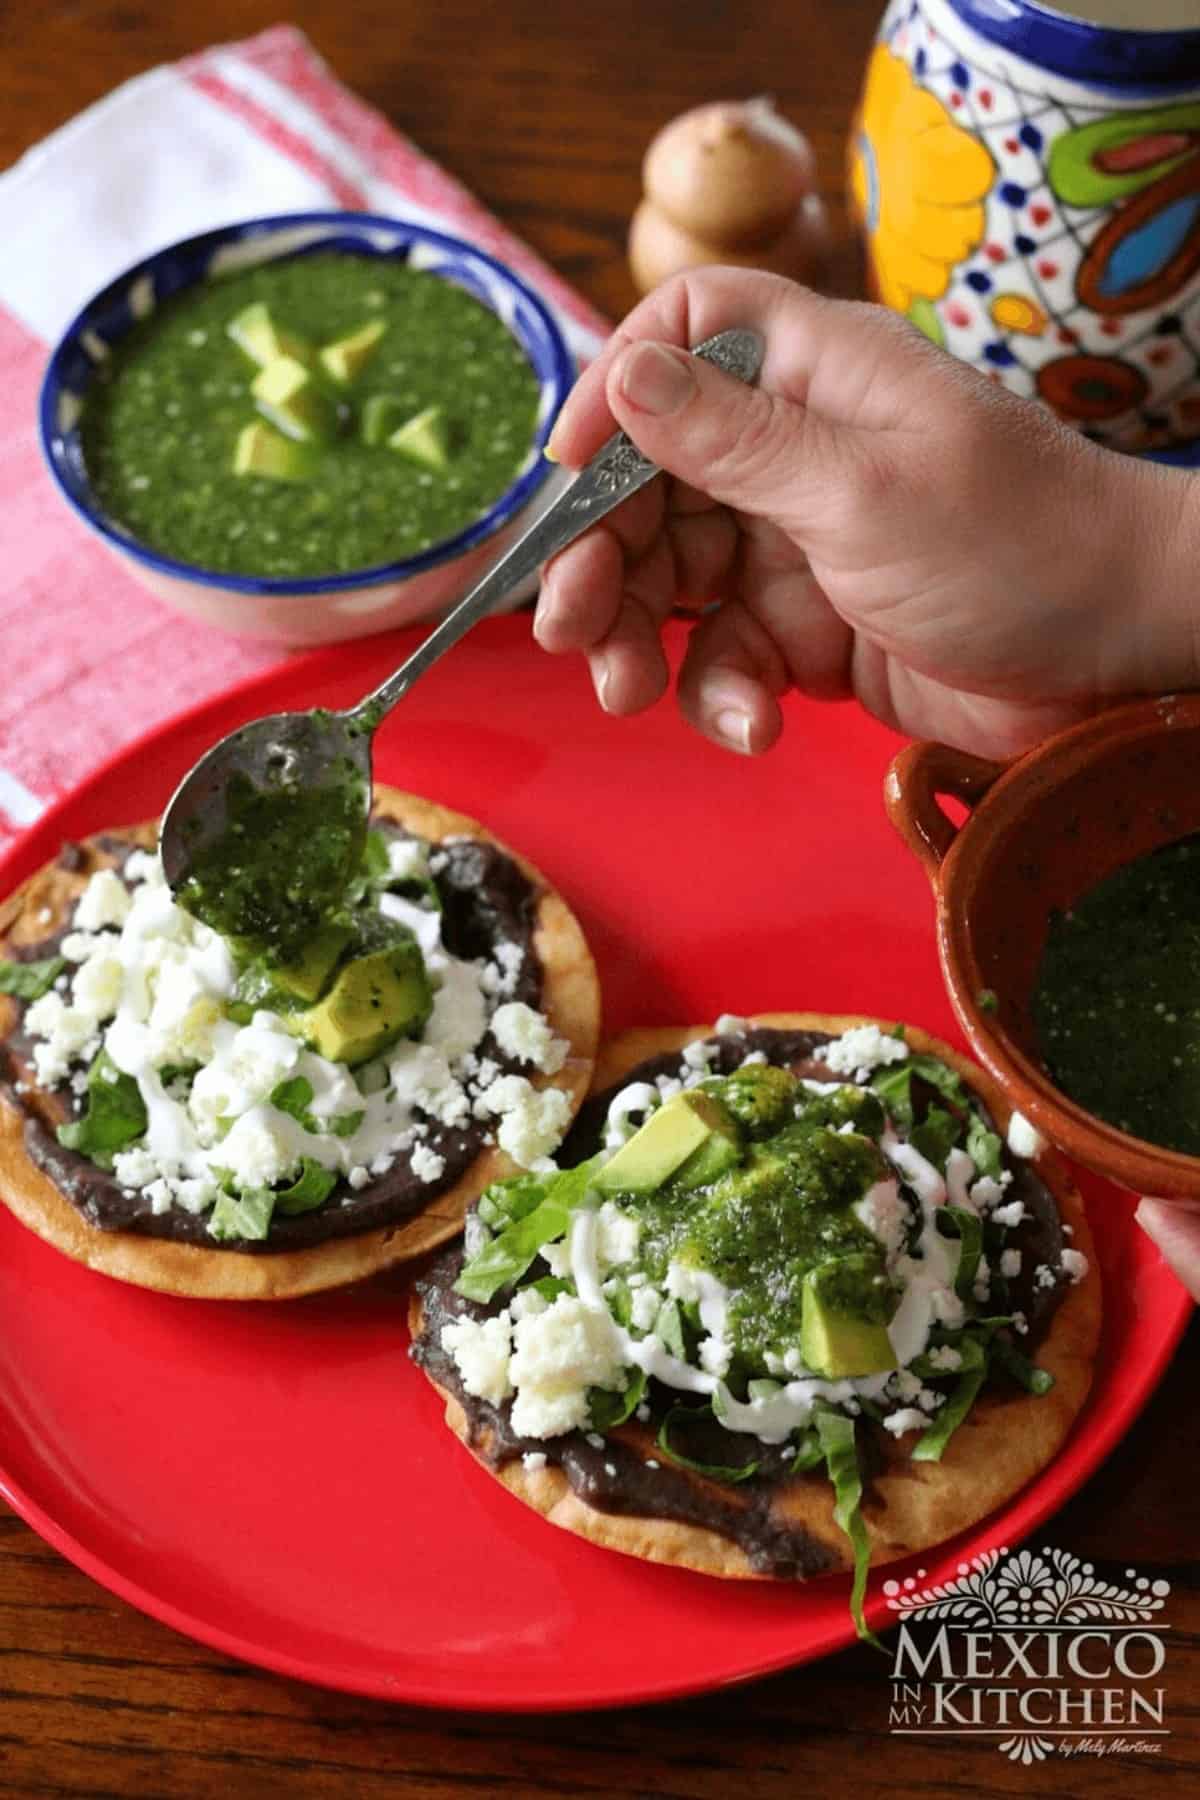 Two bean tostadas with avocado, cheese, crema and topped with salsa.